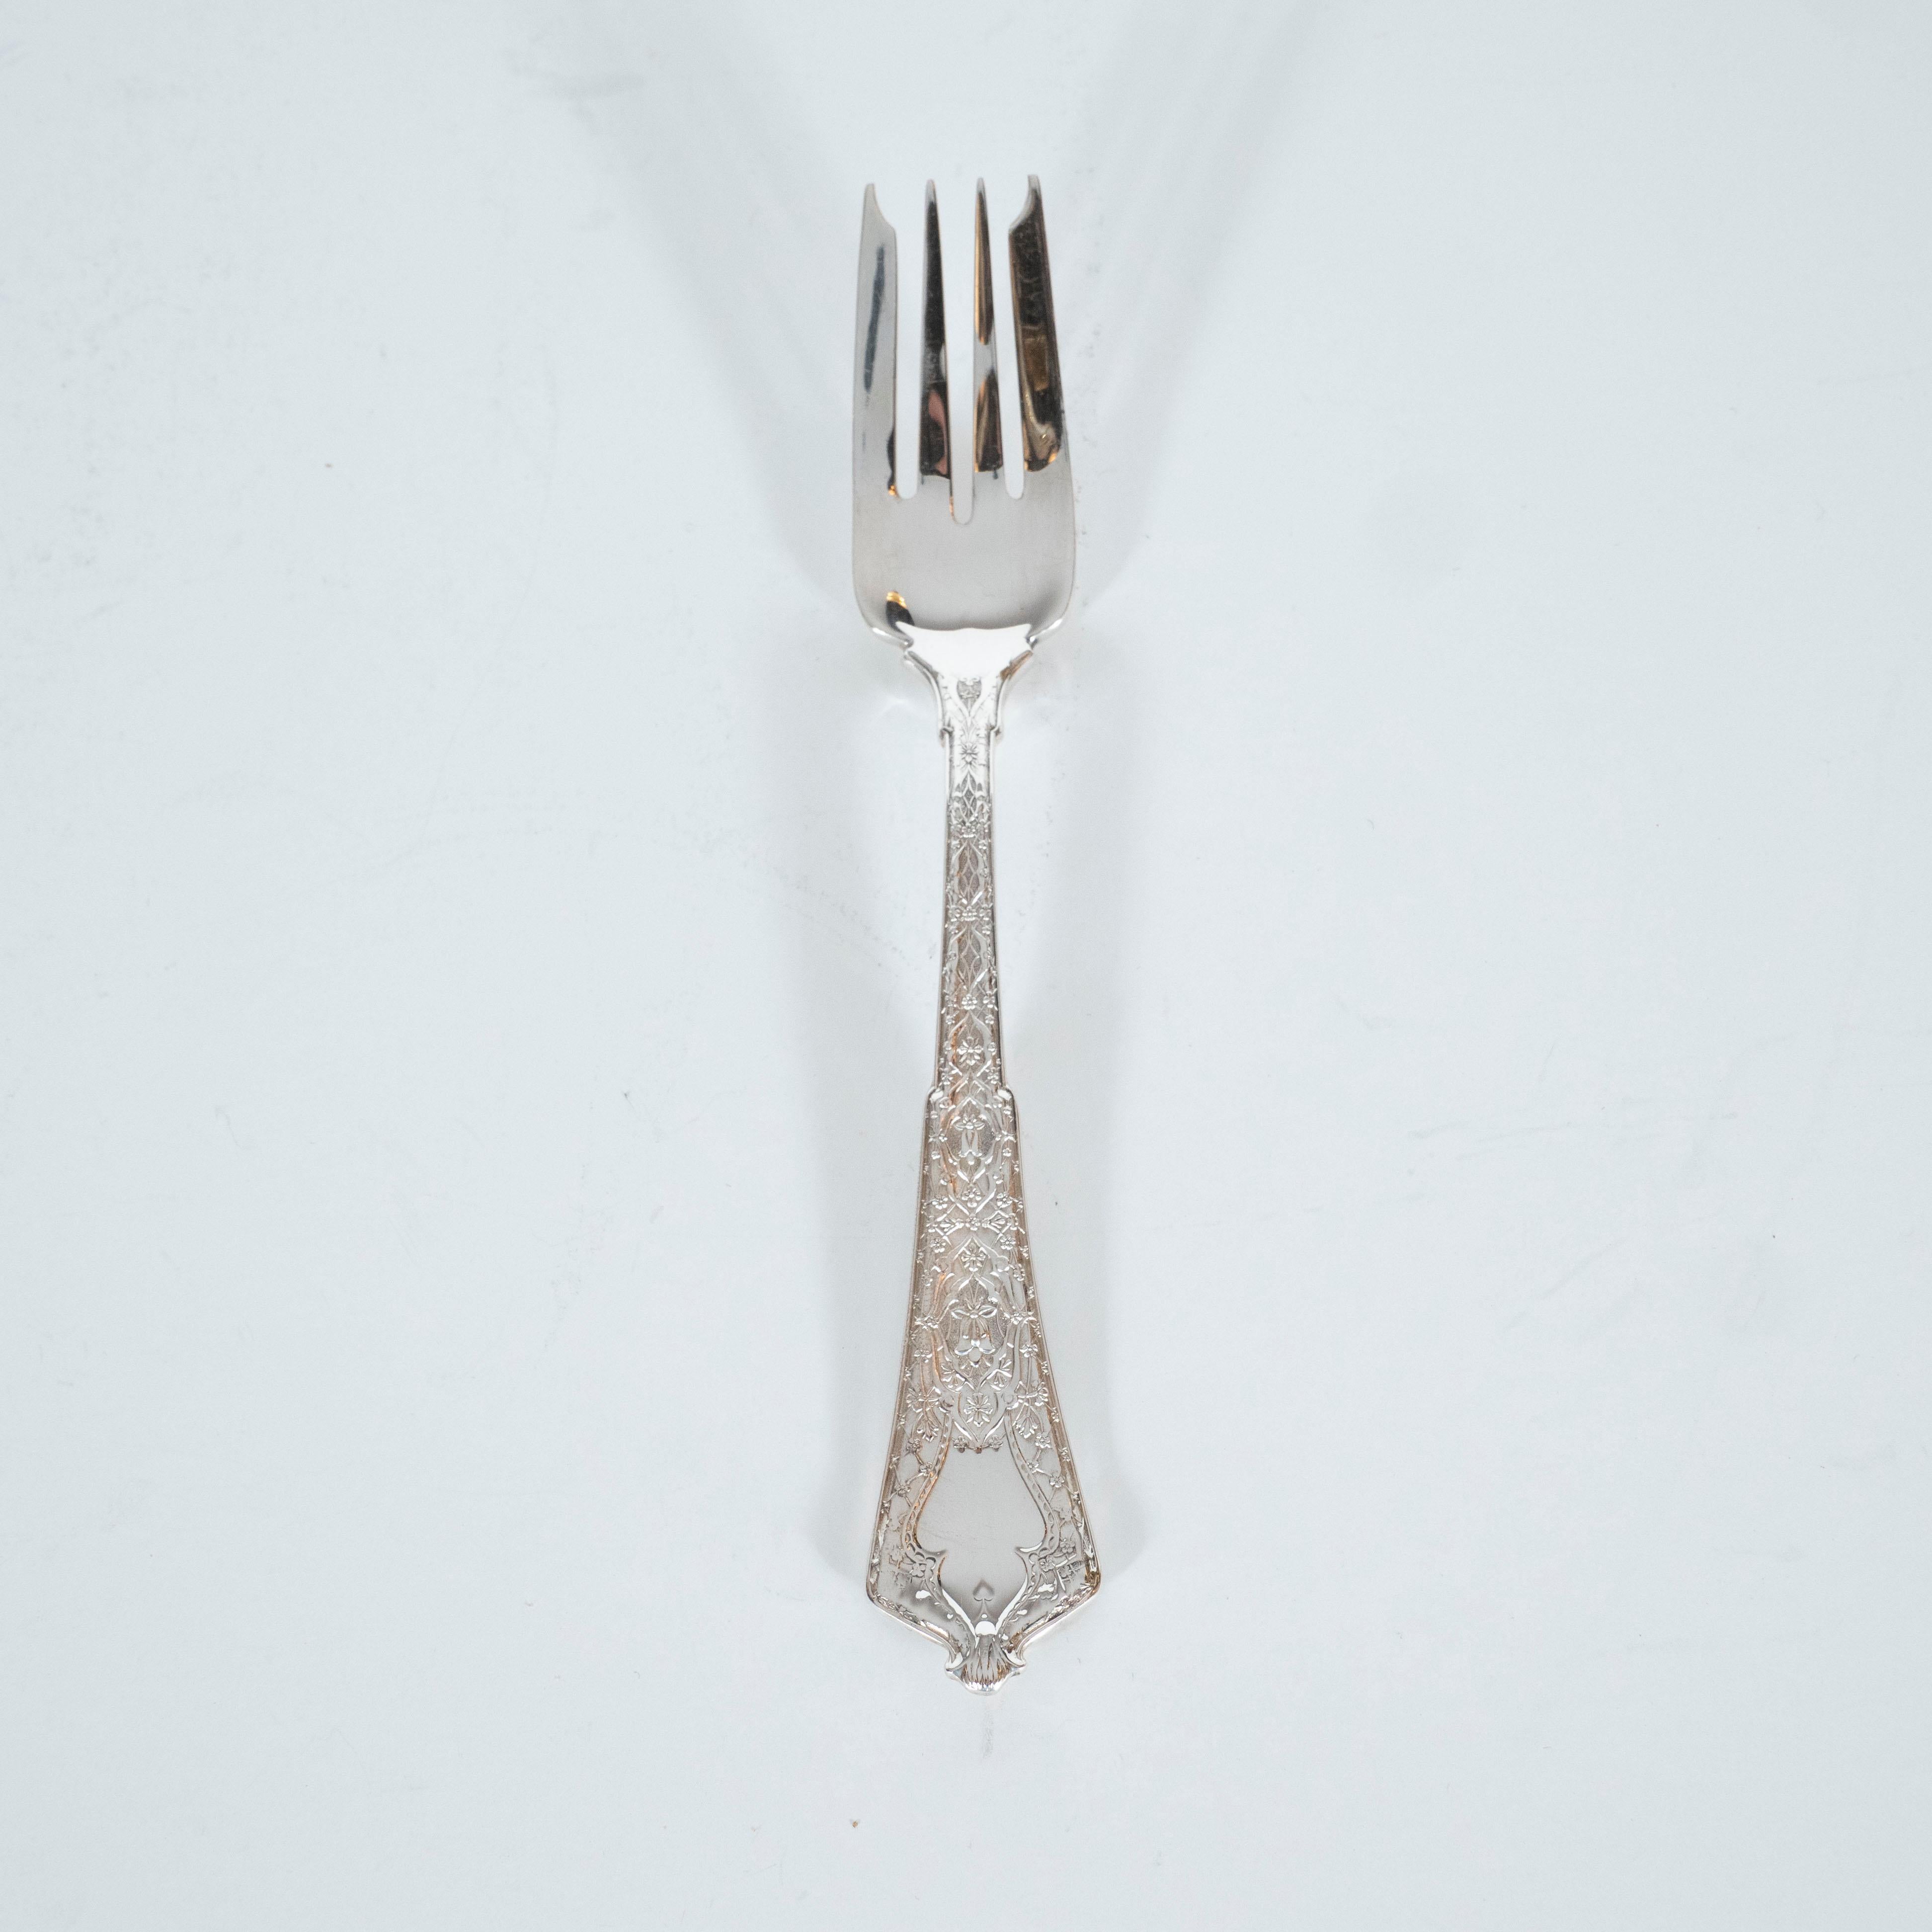 Belle Époque Set of Four Sterling Silver Forks with Arabesque Motif by Tiffany & Co.